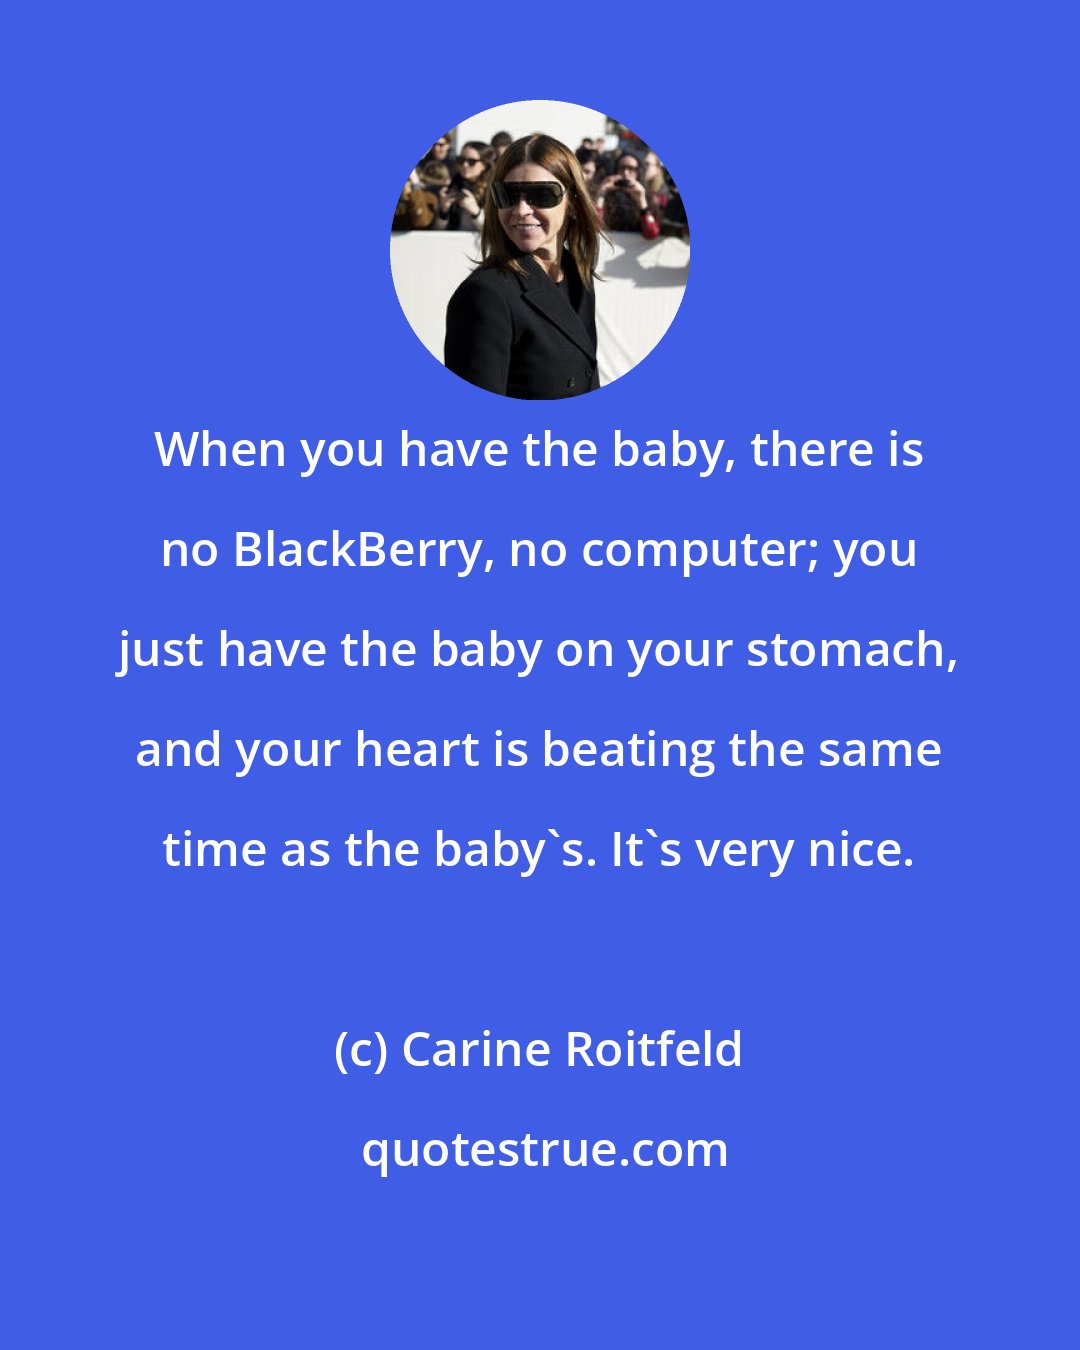 Carine Roitfeld: When you have the baby, there is no BlackBerry, no computer; you just have the baby on your stomach, and your heart is beating the same time as the baby's. It's very nice.